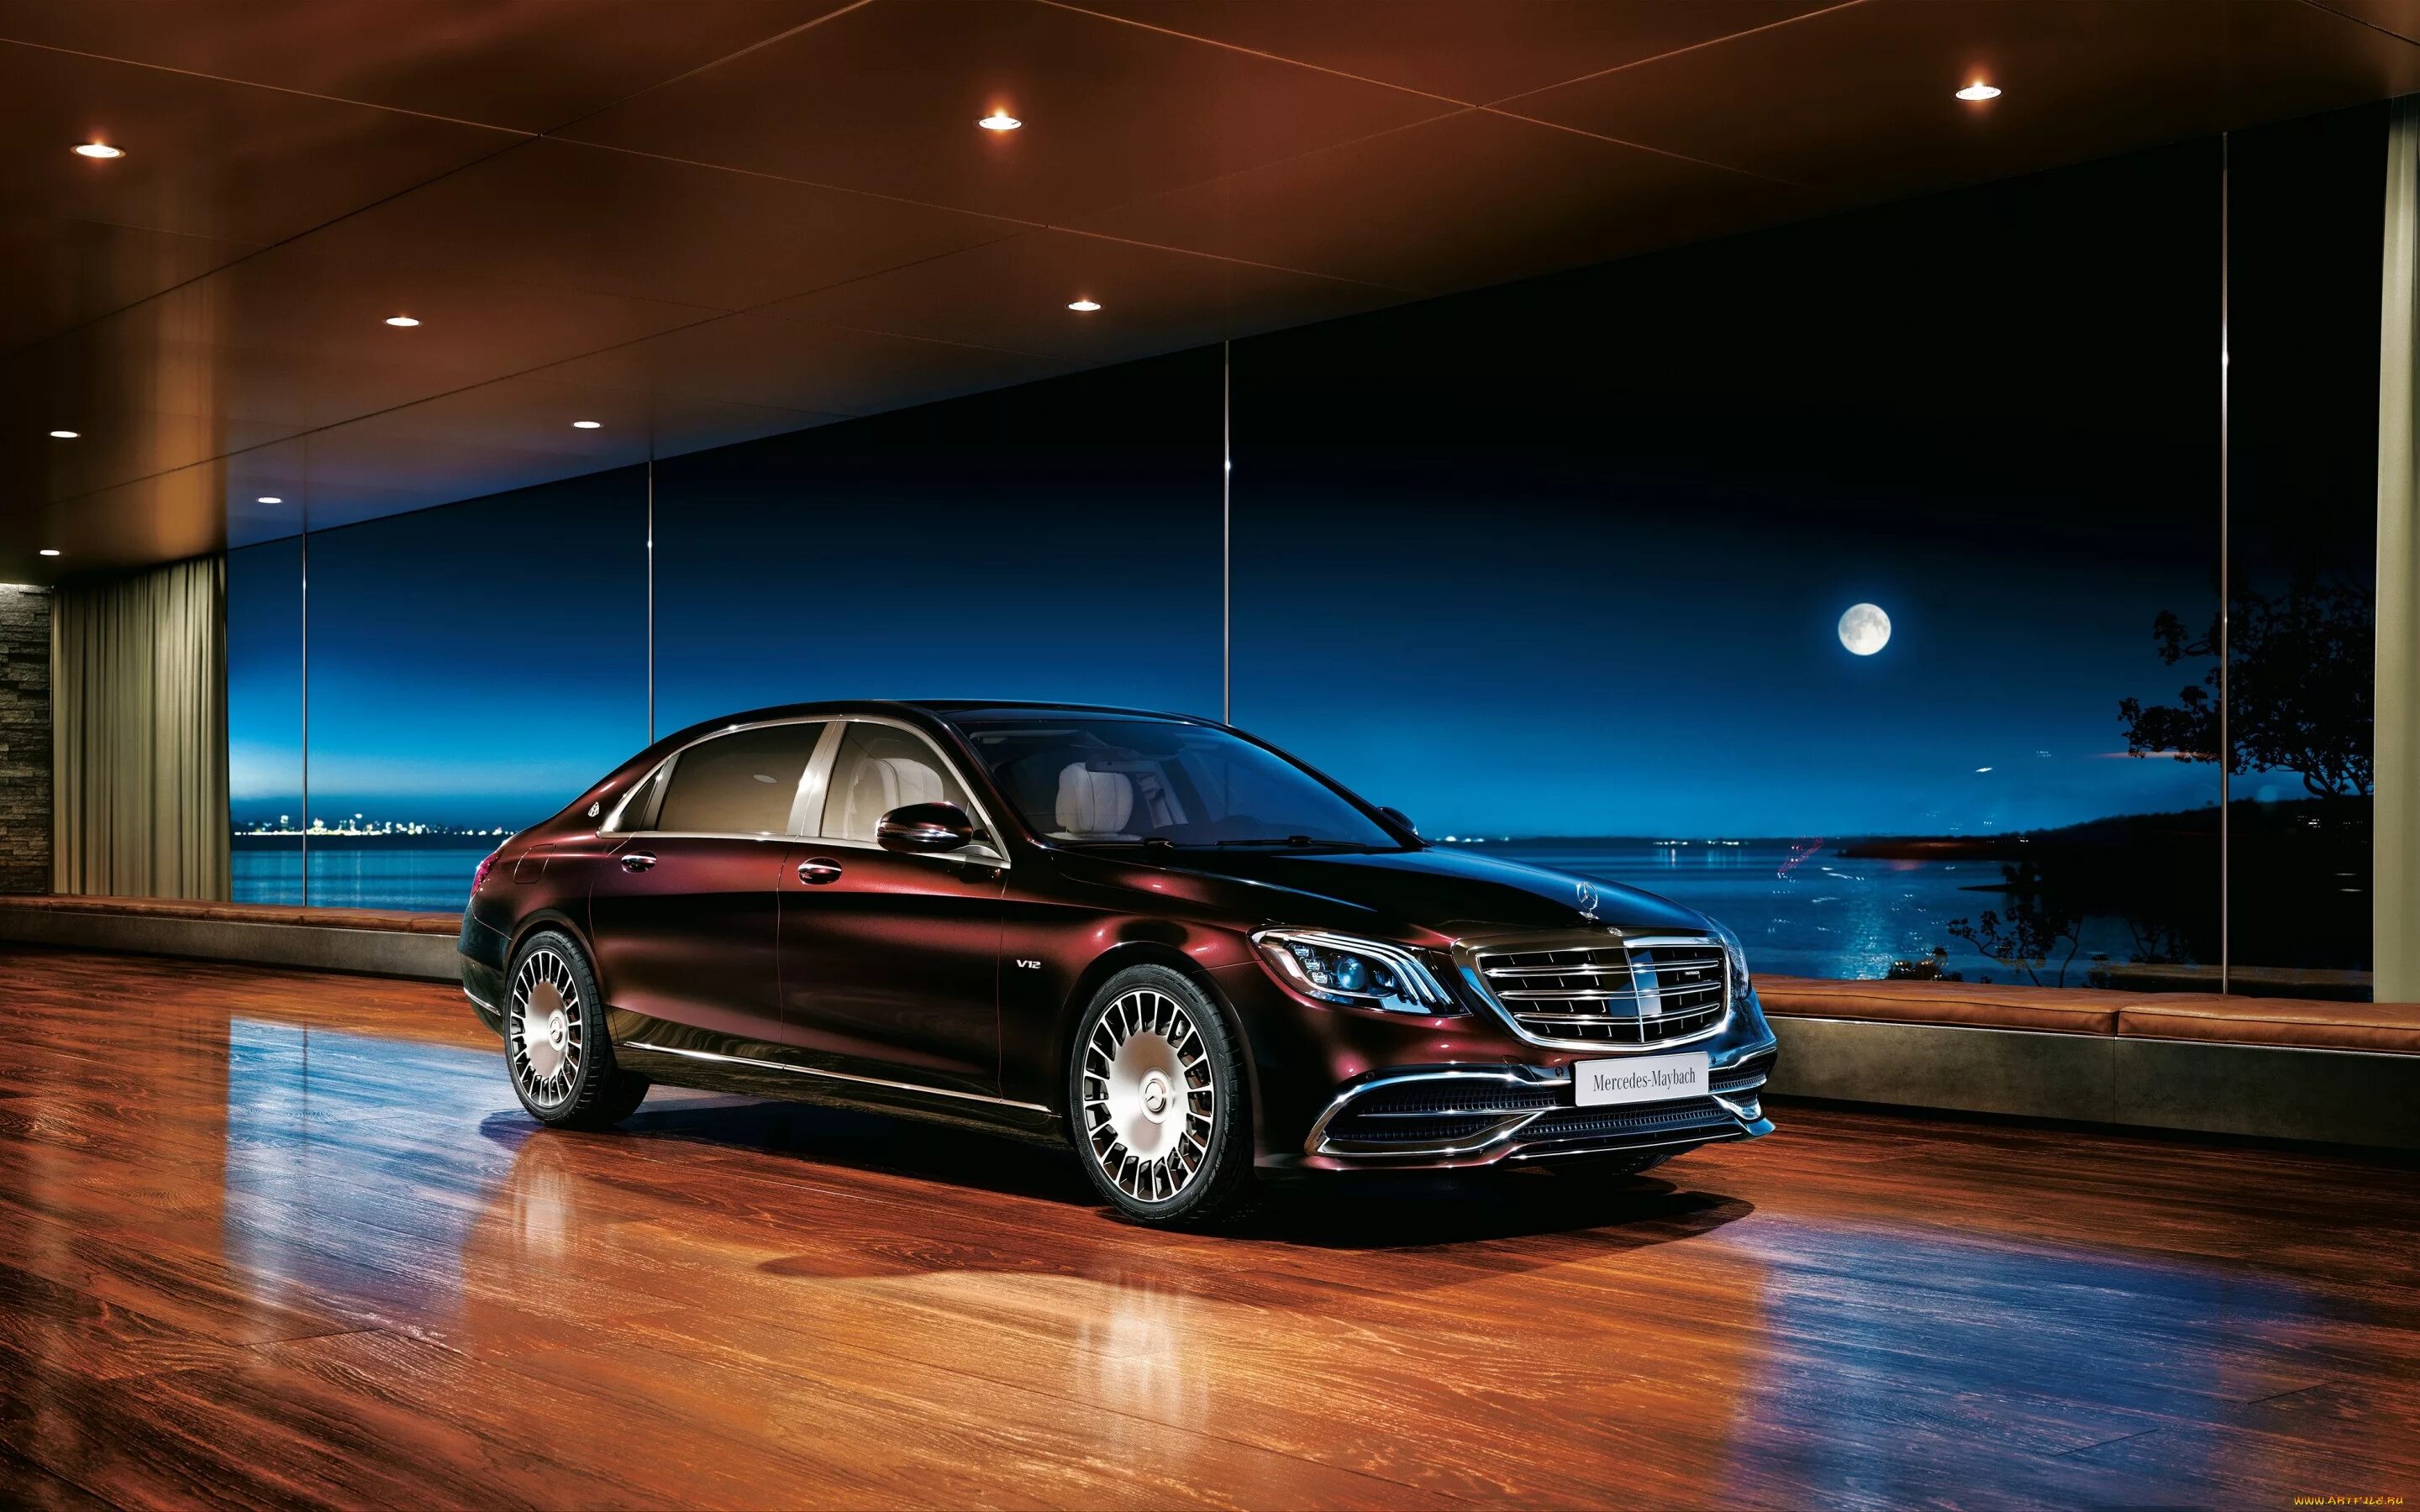 Мерседес s650. Мерседес Майбах. Мерседес Бенц Майбах s650. Мерседес s класс 2018 Майбах. Mercedes Benz Maybach s class 650.